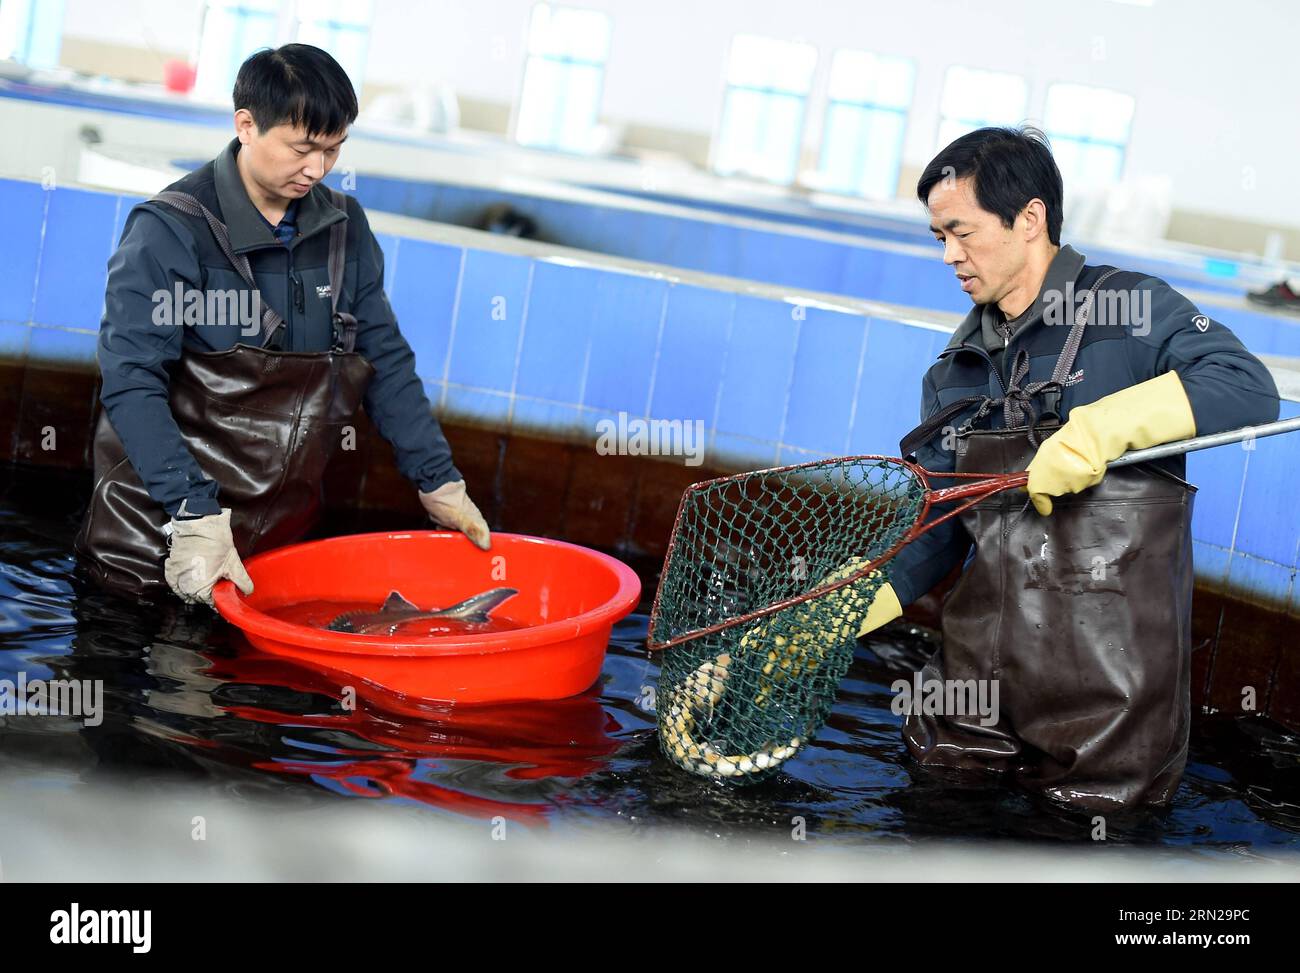 (150219) -- YICHANG, Feb. 19, 2015 -- Breeders check artificially-bred Chinese sturgeons in a tank at the Chinese Sturgeons Research Institute (CSRI) in Yichang, central China s Hubei Province, Feb. 19, 2015. Chinese sturgeons, nicknamed aquatic pandas , are listed as a wild creature under state protection. Researchers with CSRI succeeded in artificially inseminating and spawning a culture of sturgeons in 2009. Since then fish have been released into the river every year to save the species from extinction. At present, some 5,000 artificially-bred sturgeons live in the CSRI, which is founded i Stock Photo